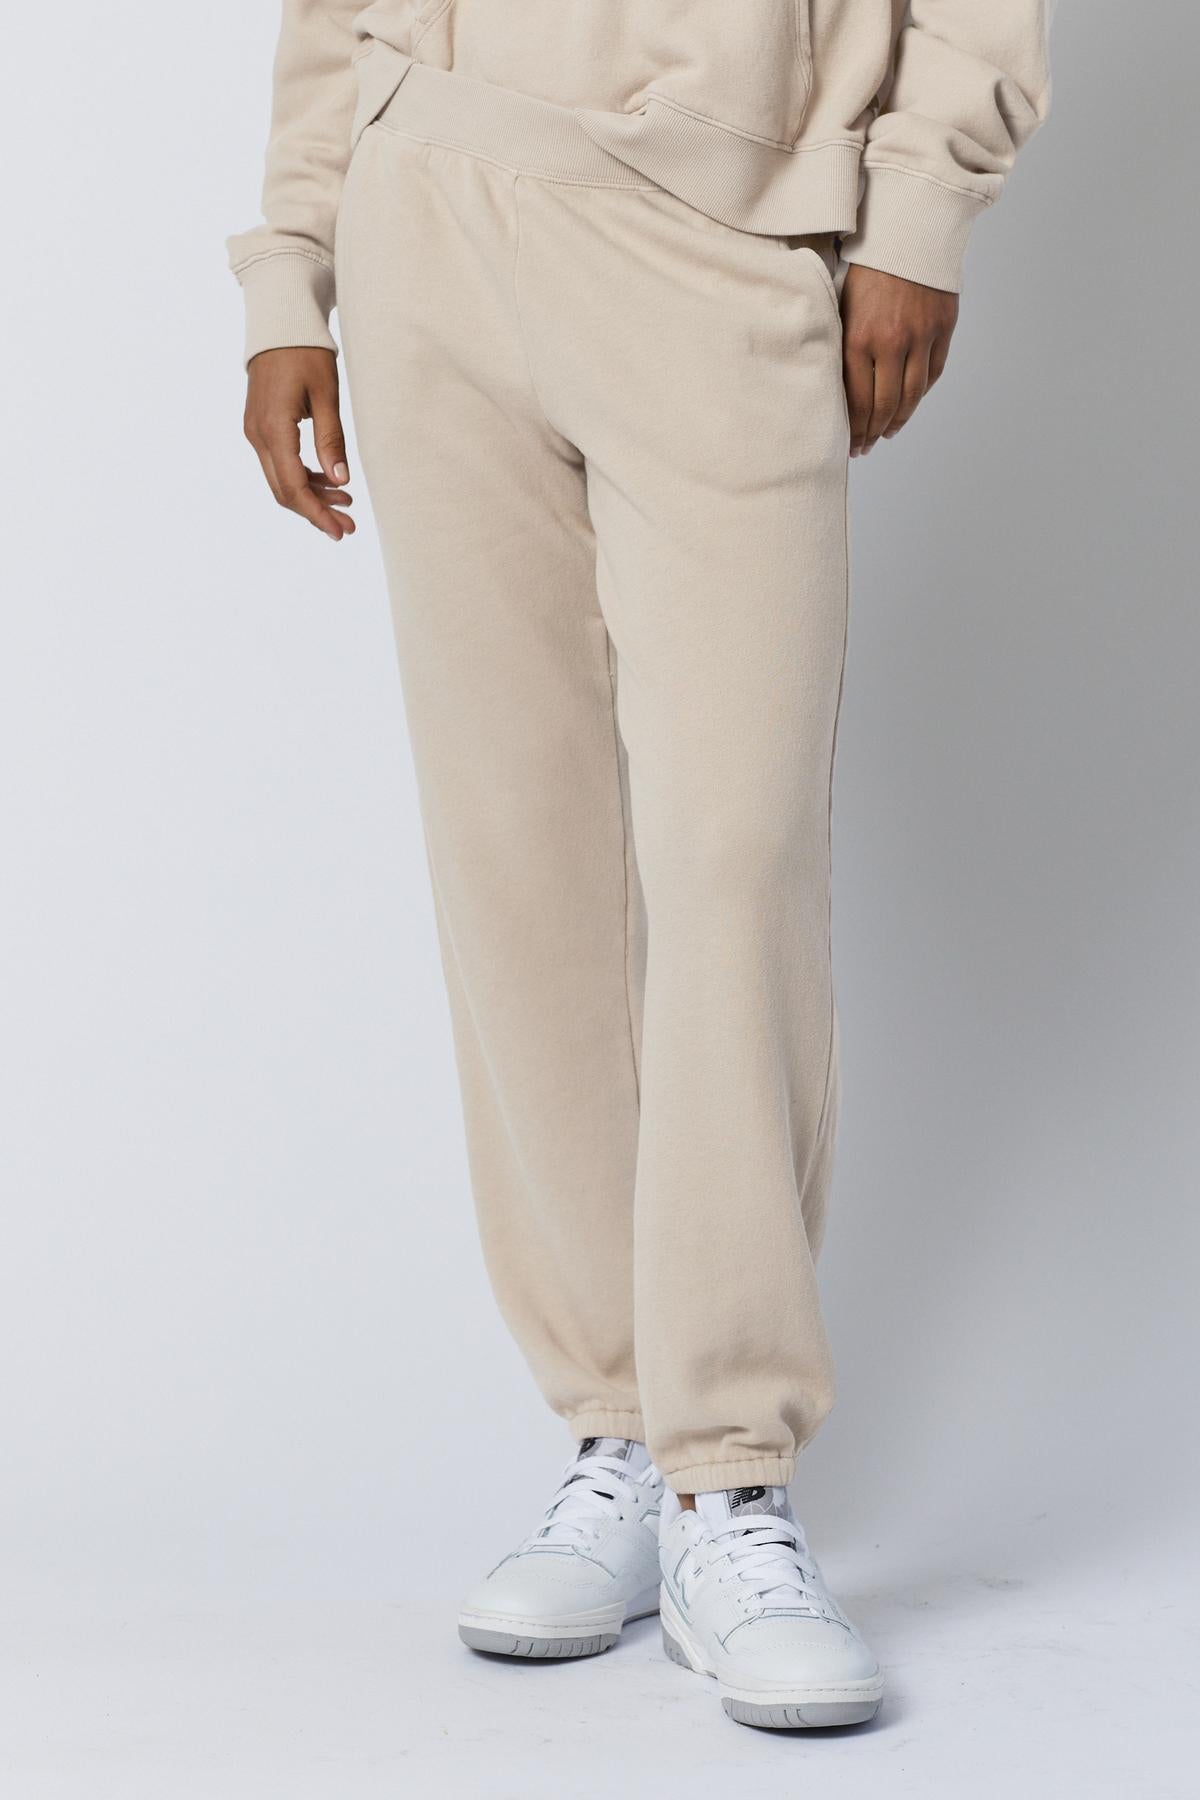 Person wearing Velvet by Jenny Graham's ZUMA SWEATPANT joggers and a matching hoodie with white sneakers, standing against a plain background. Only the lower half of the body is shown.-36863305318593